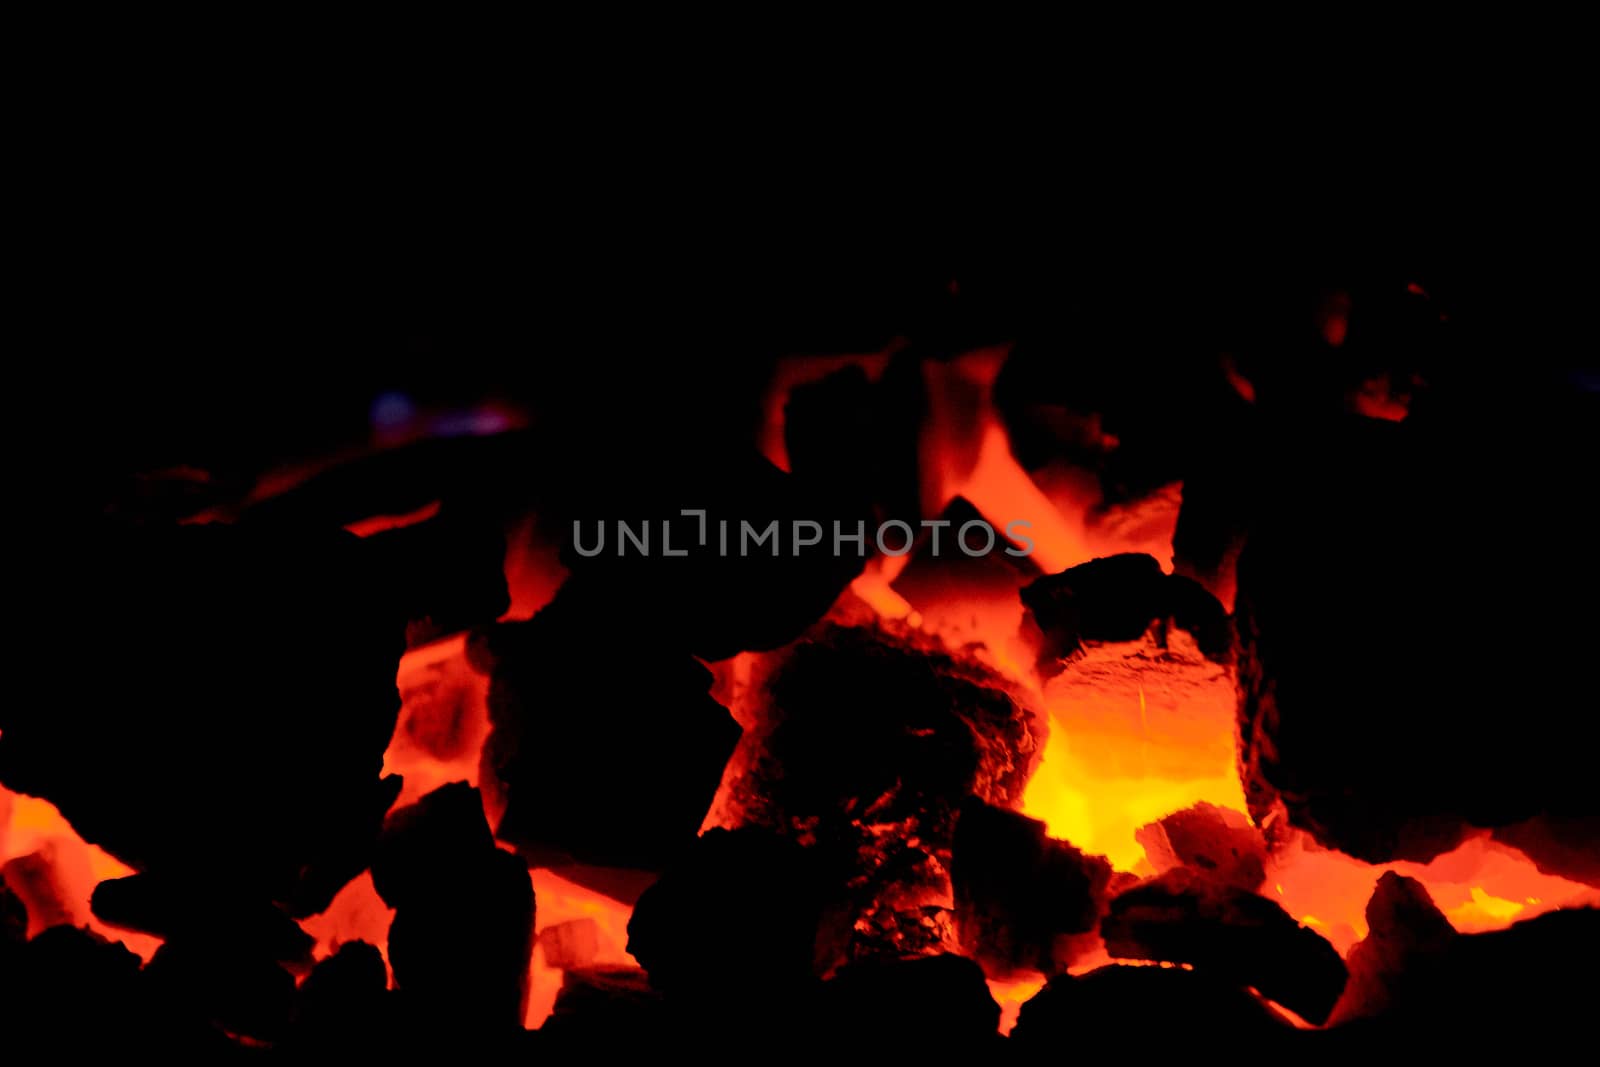 Coal anthracite. Burning coal in the furnace of a solid fuel boiler. Heat. Flame. Forge furnace. Hot coal. Burning solid fuel.